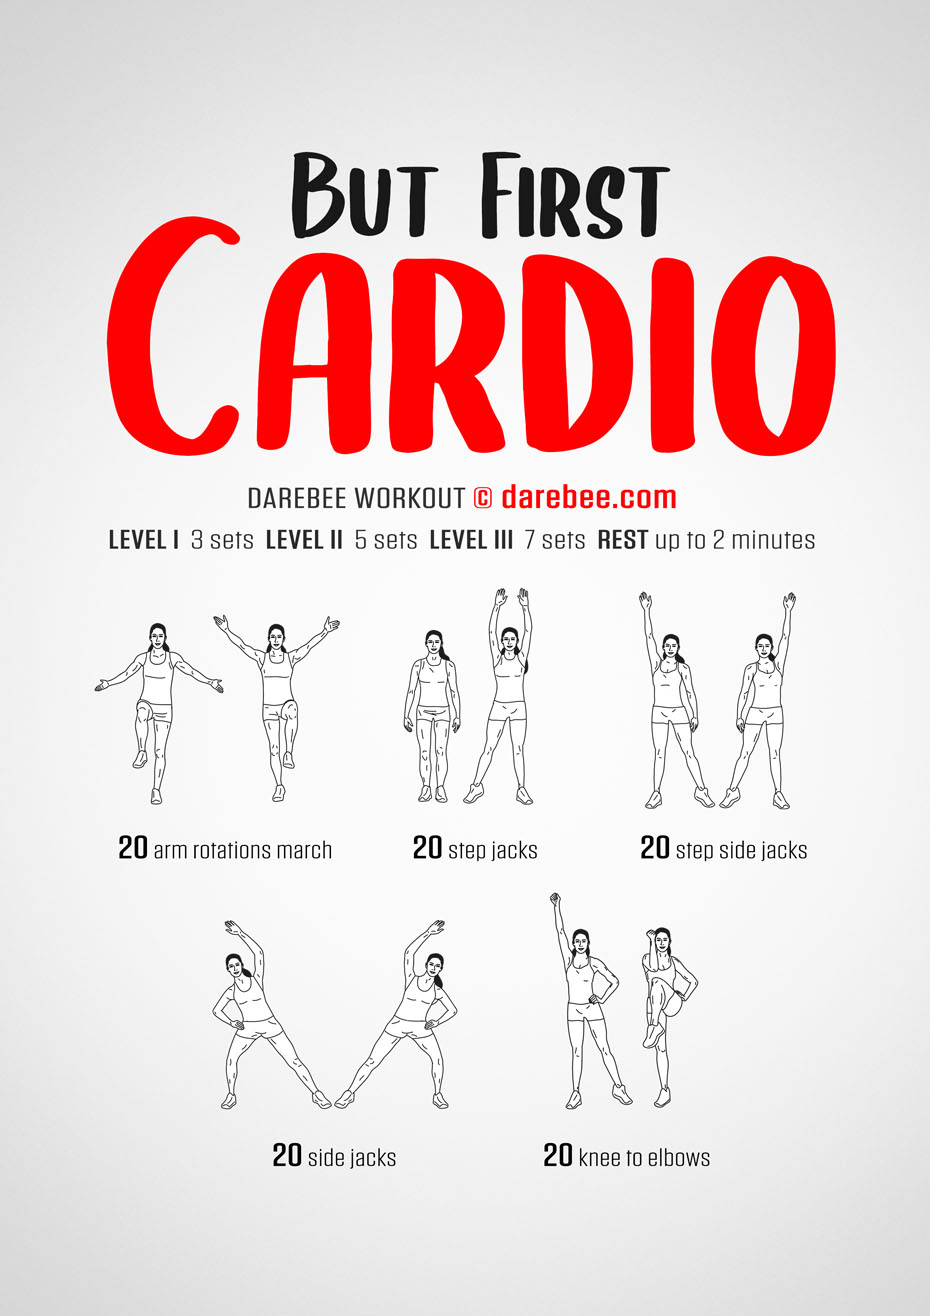 But First Cardio is a fast-moving, high-burn Darebee home-fitness workout that will raise your body temperature, make you sweat and raise your heartbeat and breathing rate.